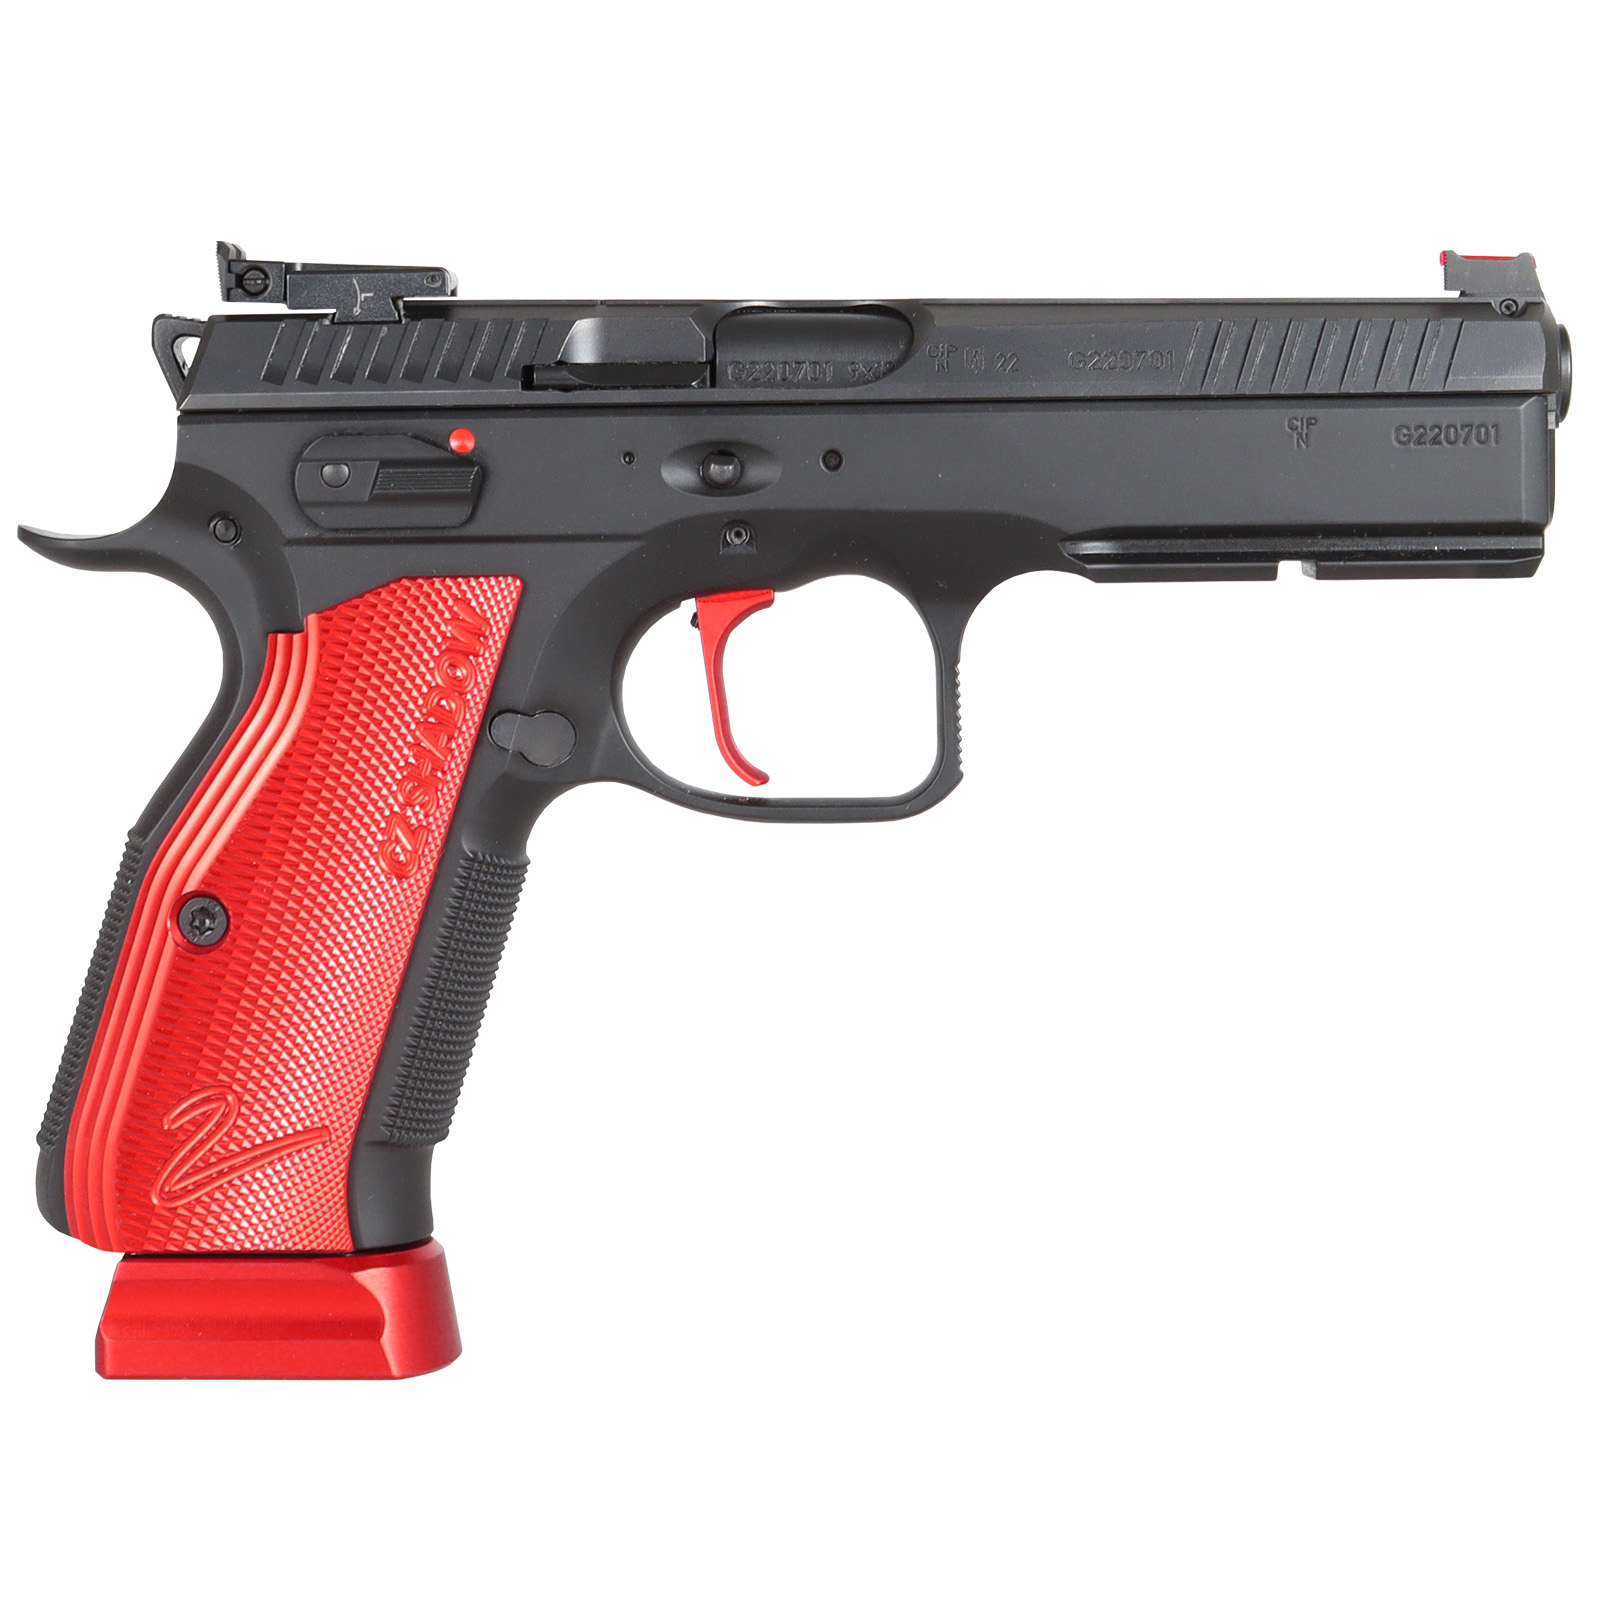 CZ Shadow 2 HOT RED Pistole